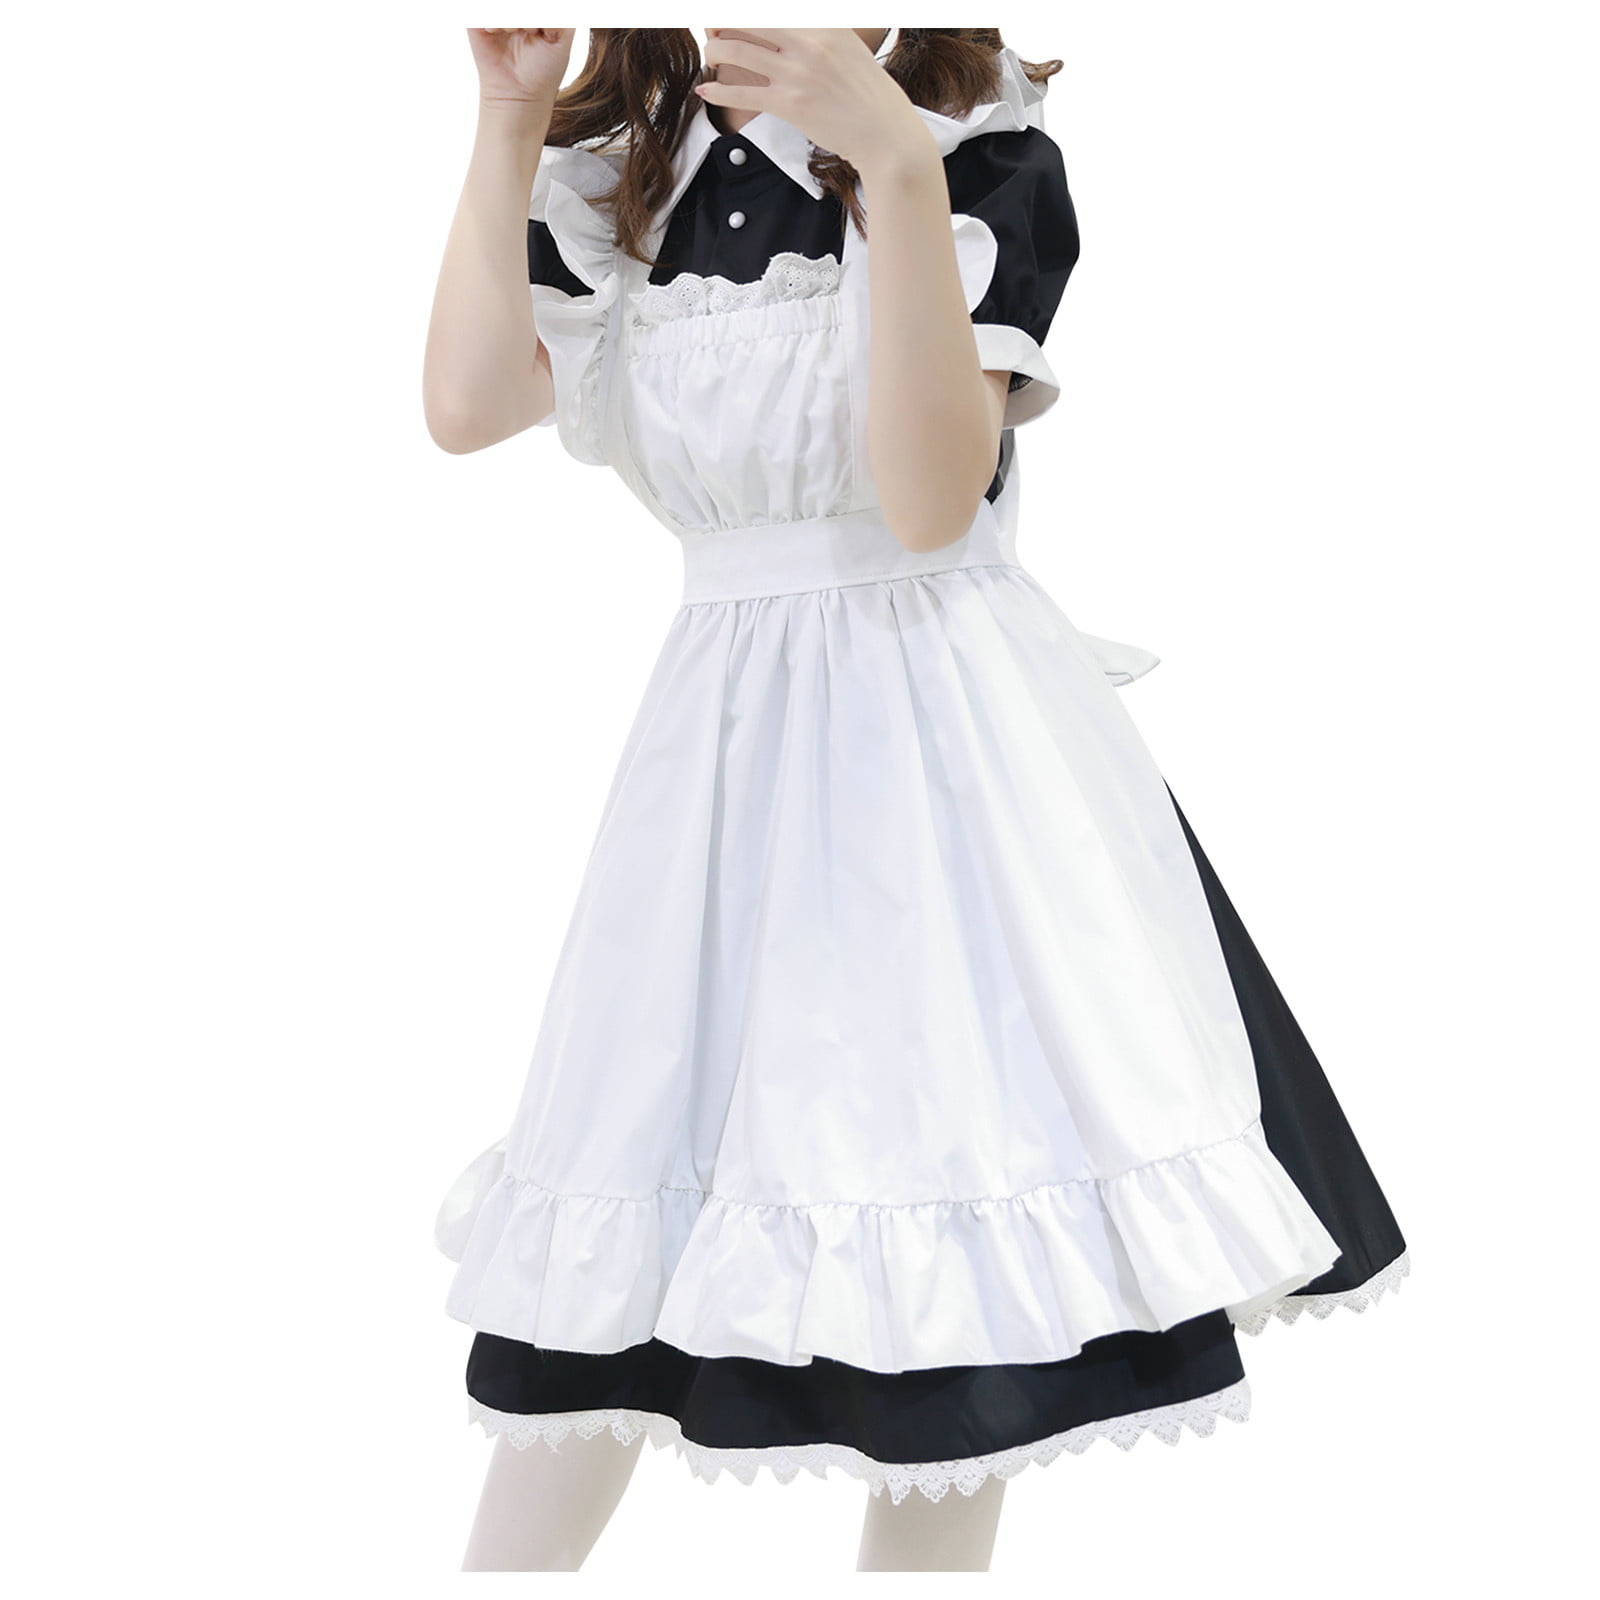 Asia France Maid Cosplay Fancy Dress Halloween Party Costume Wear Size S-M 